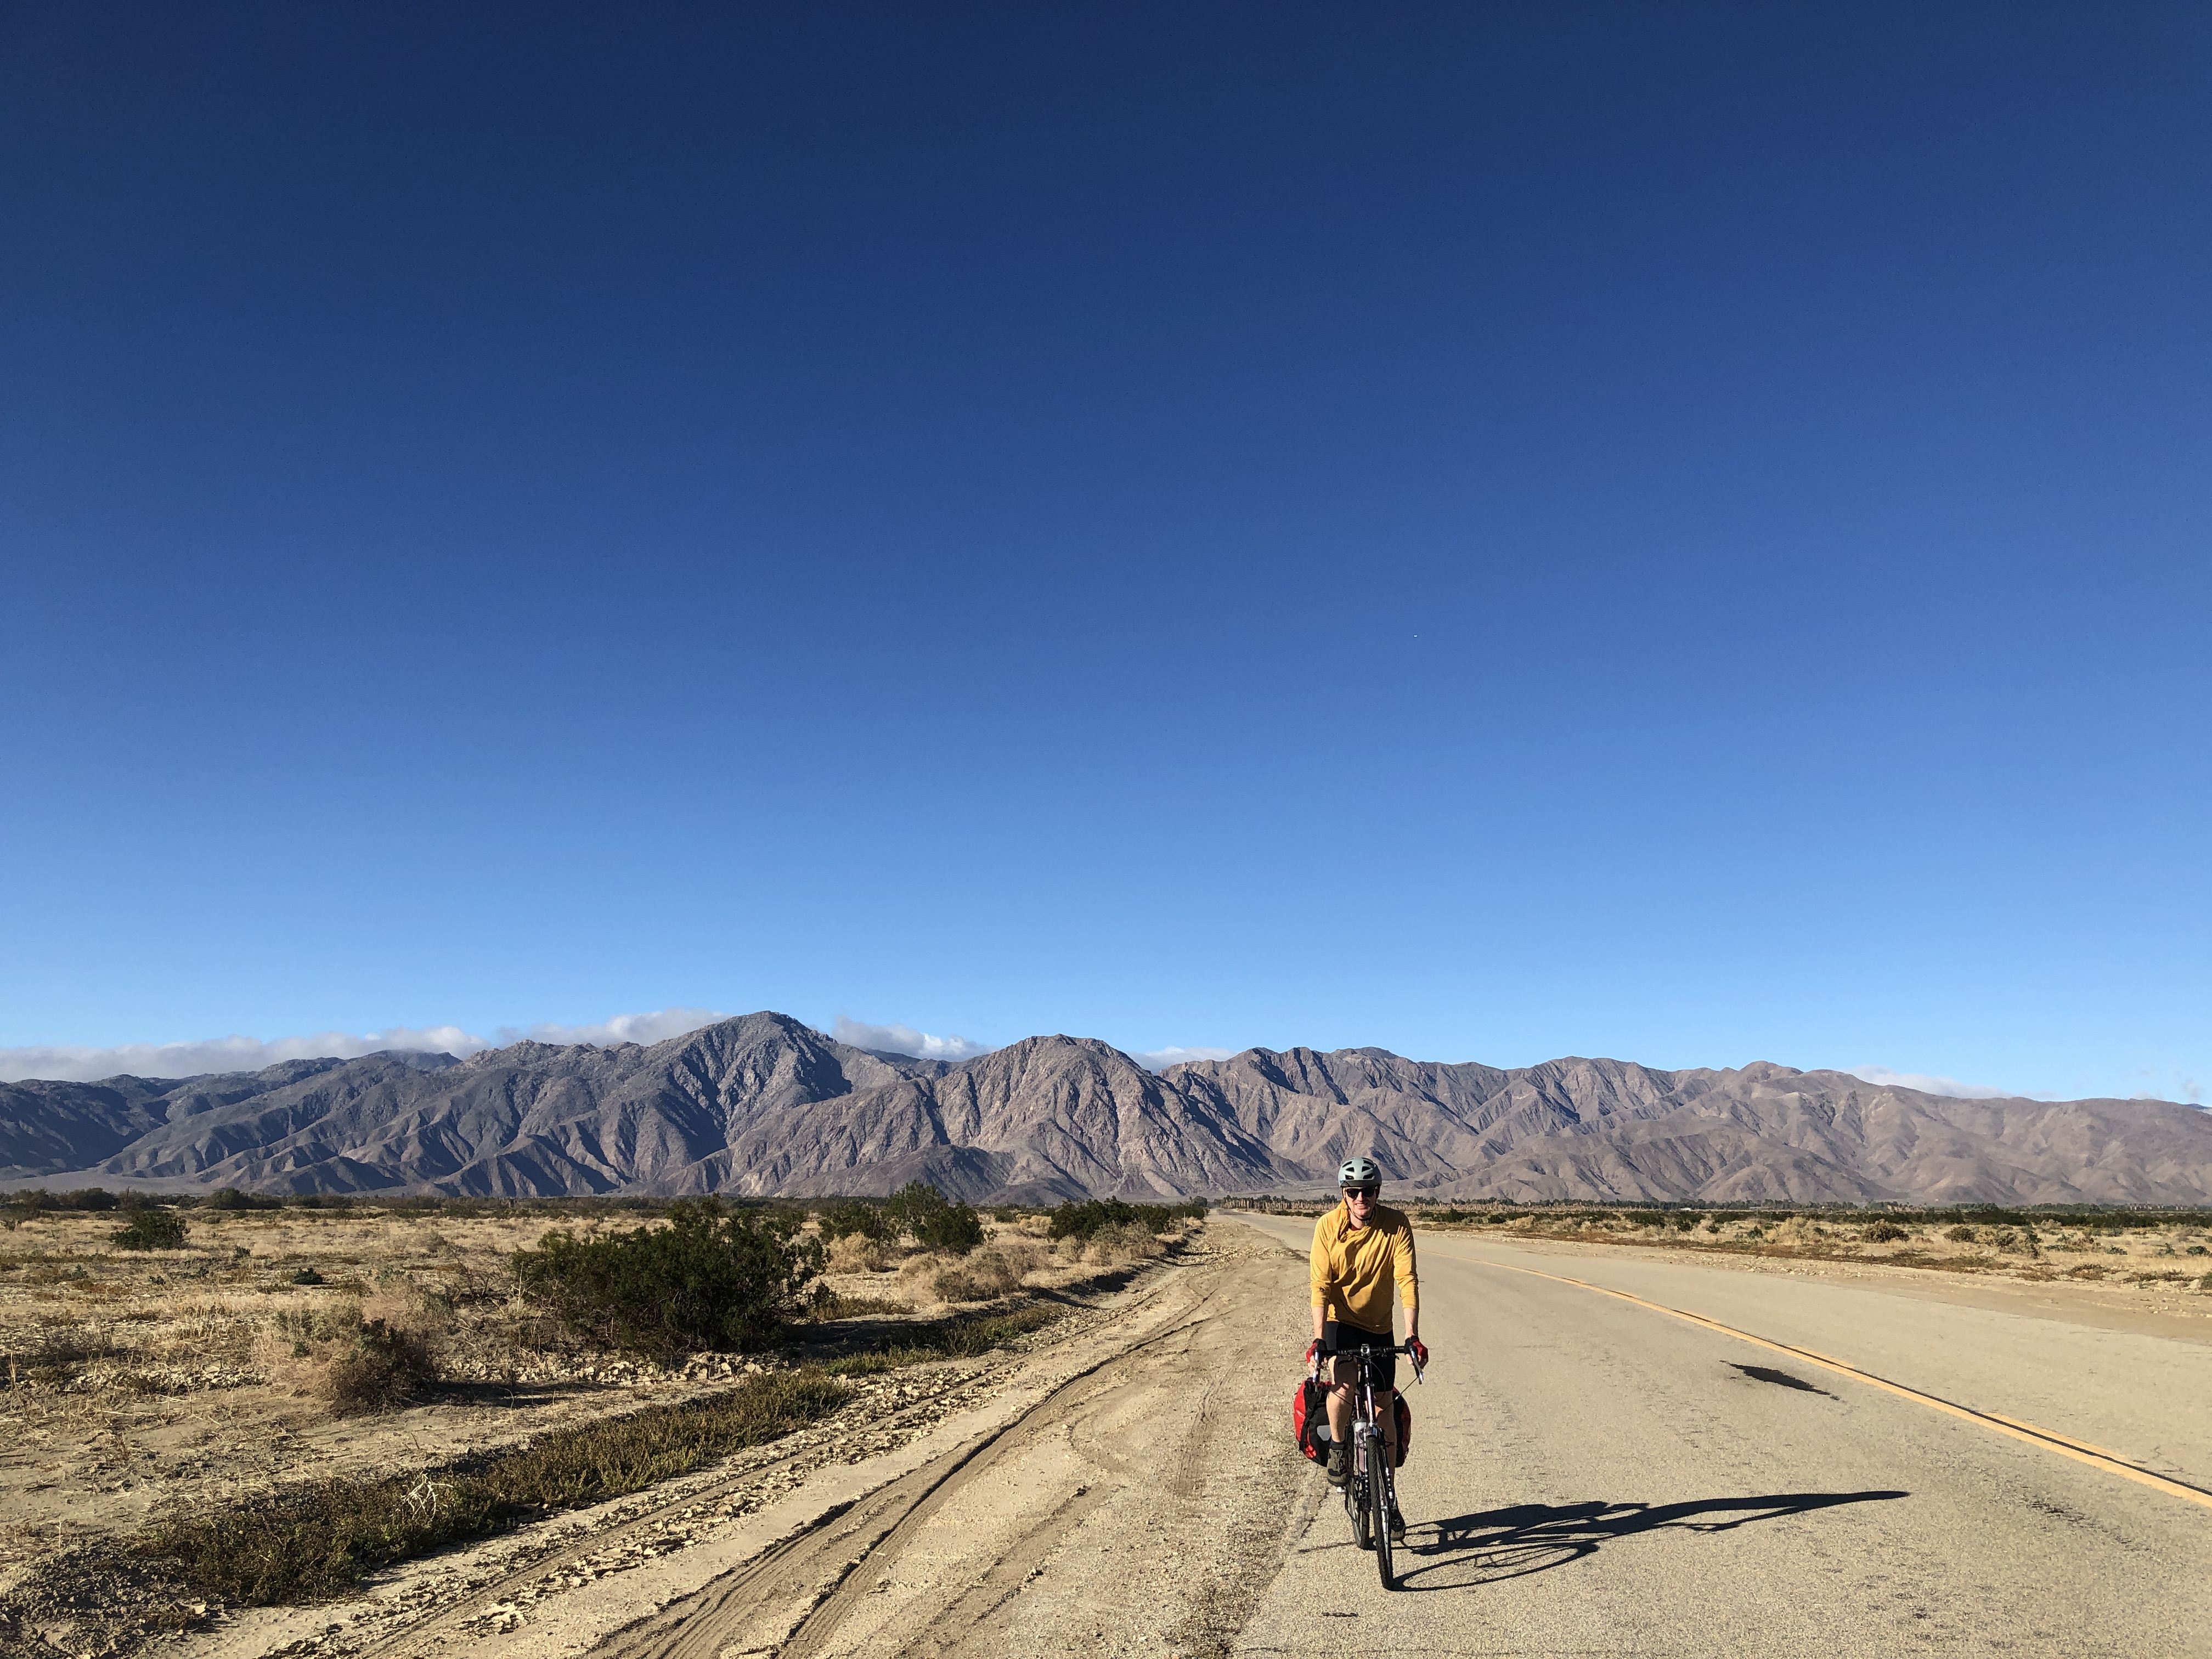 a man on a bike riding in the desert